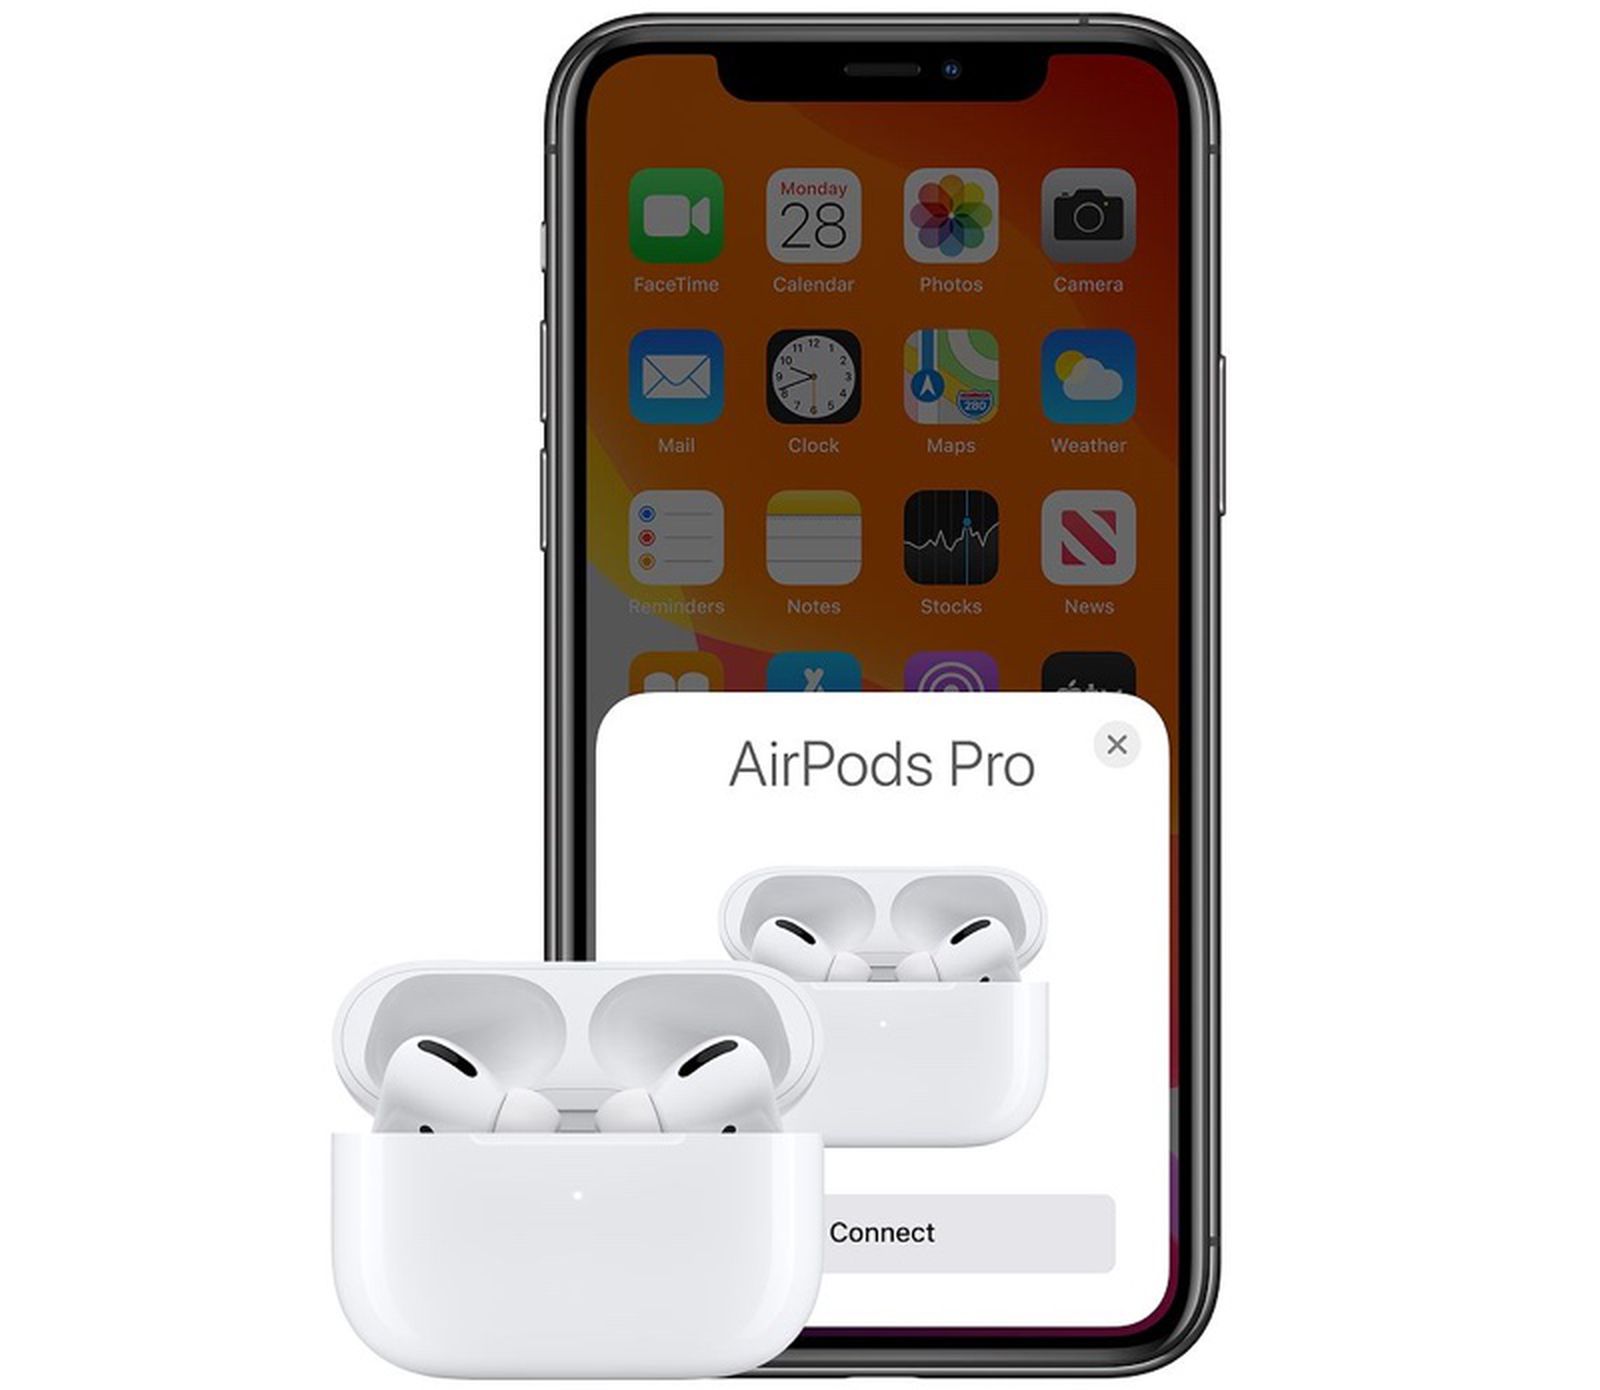 AirPods Pro Offer 'Close to Seamless' Audio Experience Thanks to 